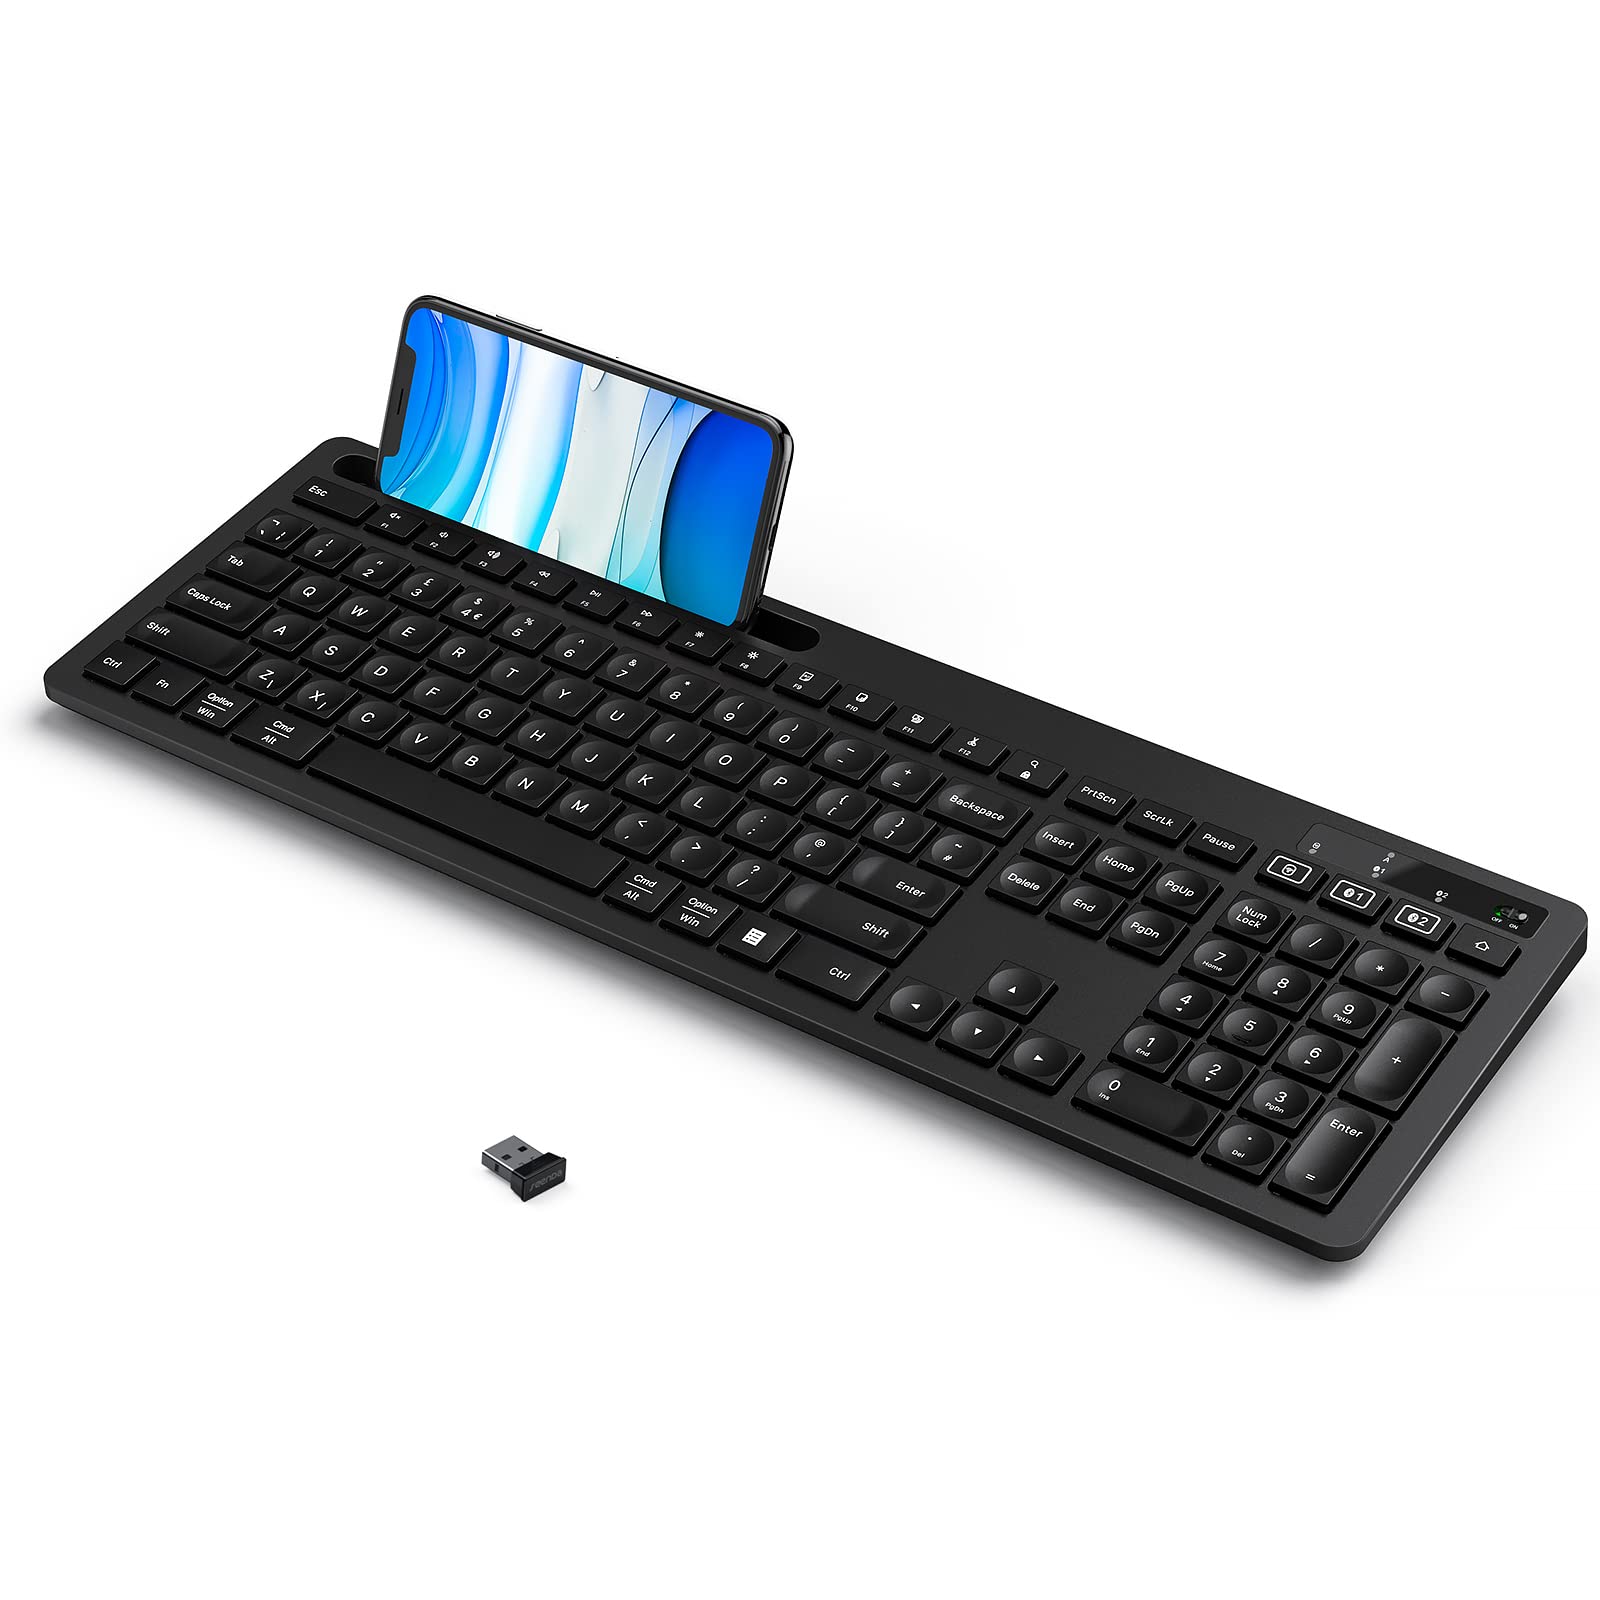 Put the keyboard in pairing mode (refer to the keyboard's manual for instructions)
Search for new Bluetooth devices on the device